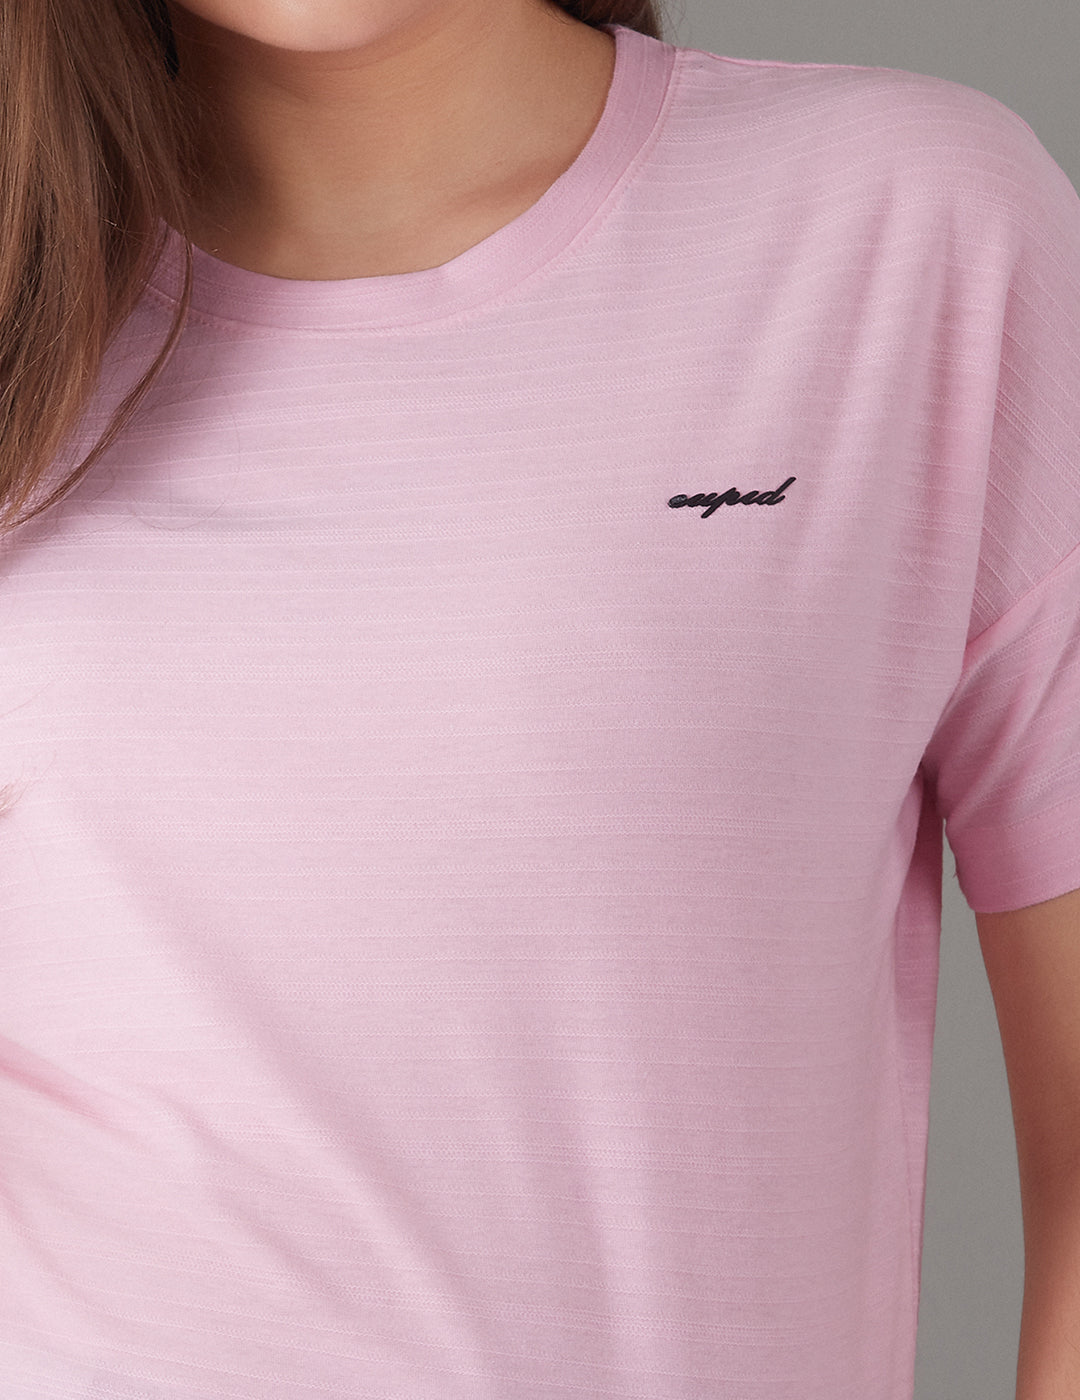 stylish Plain Short T-Shirts for women In pink At Best Price